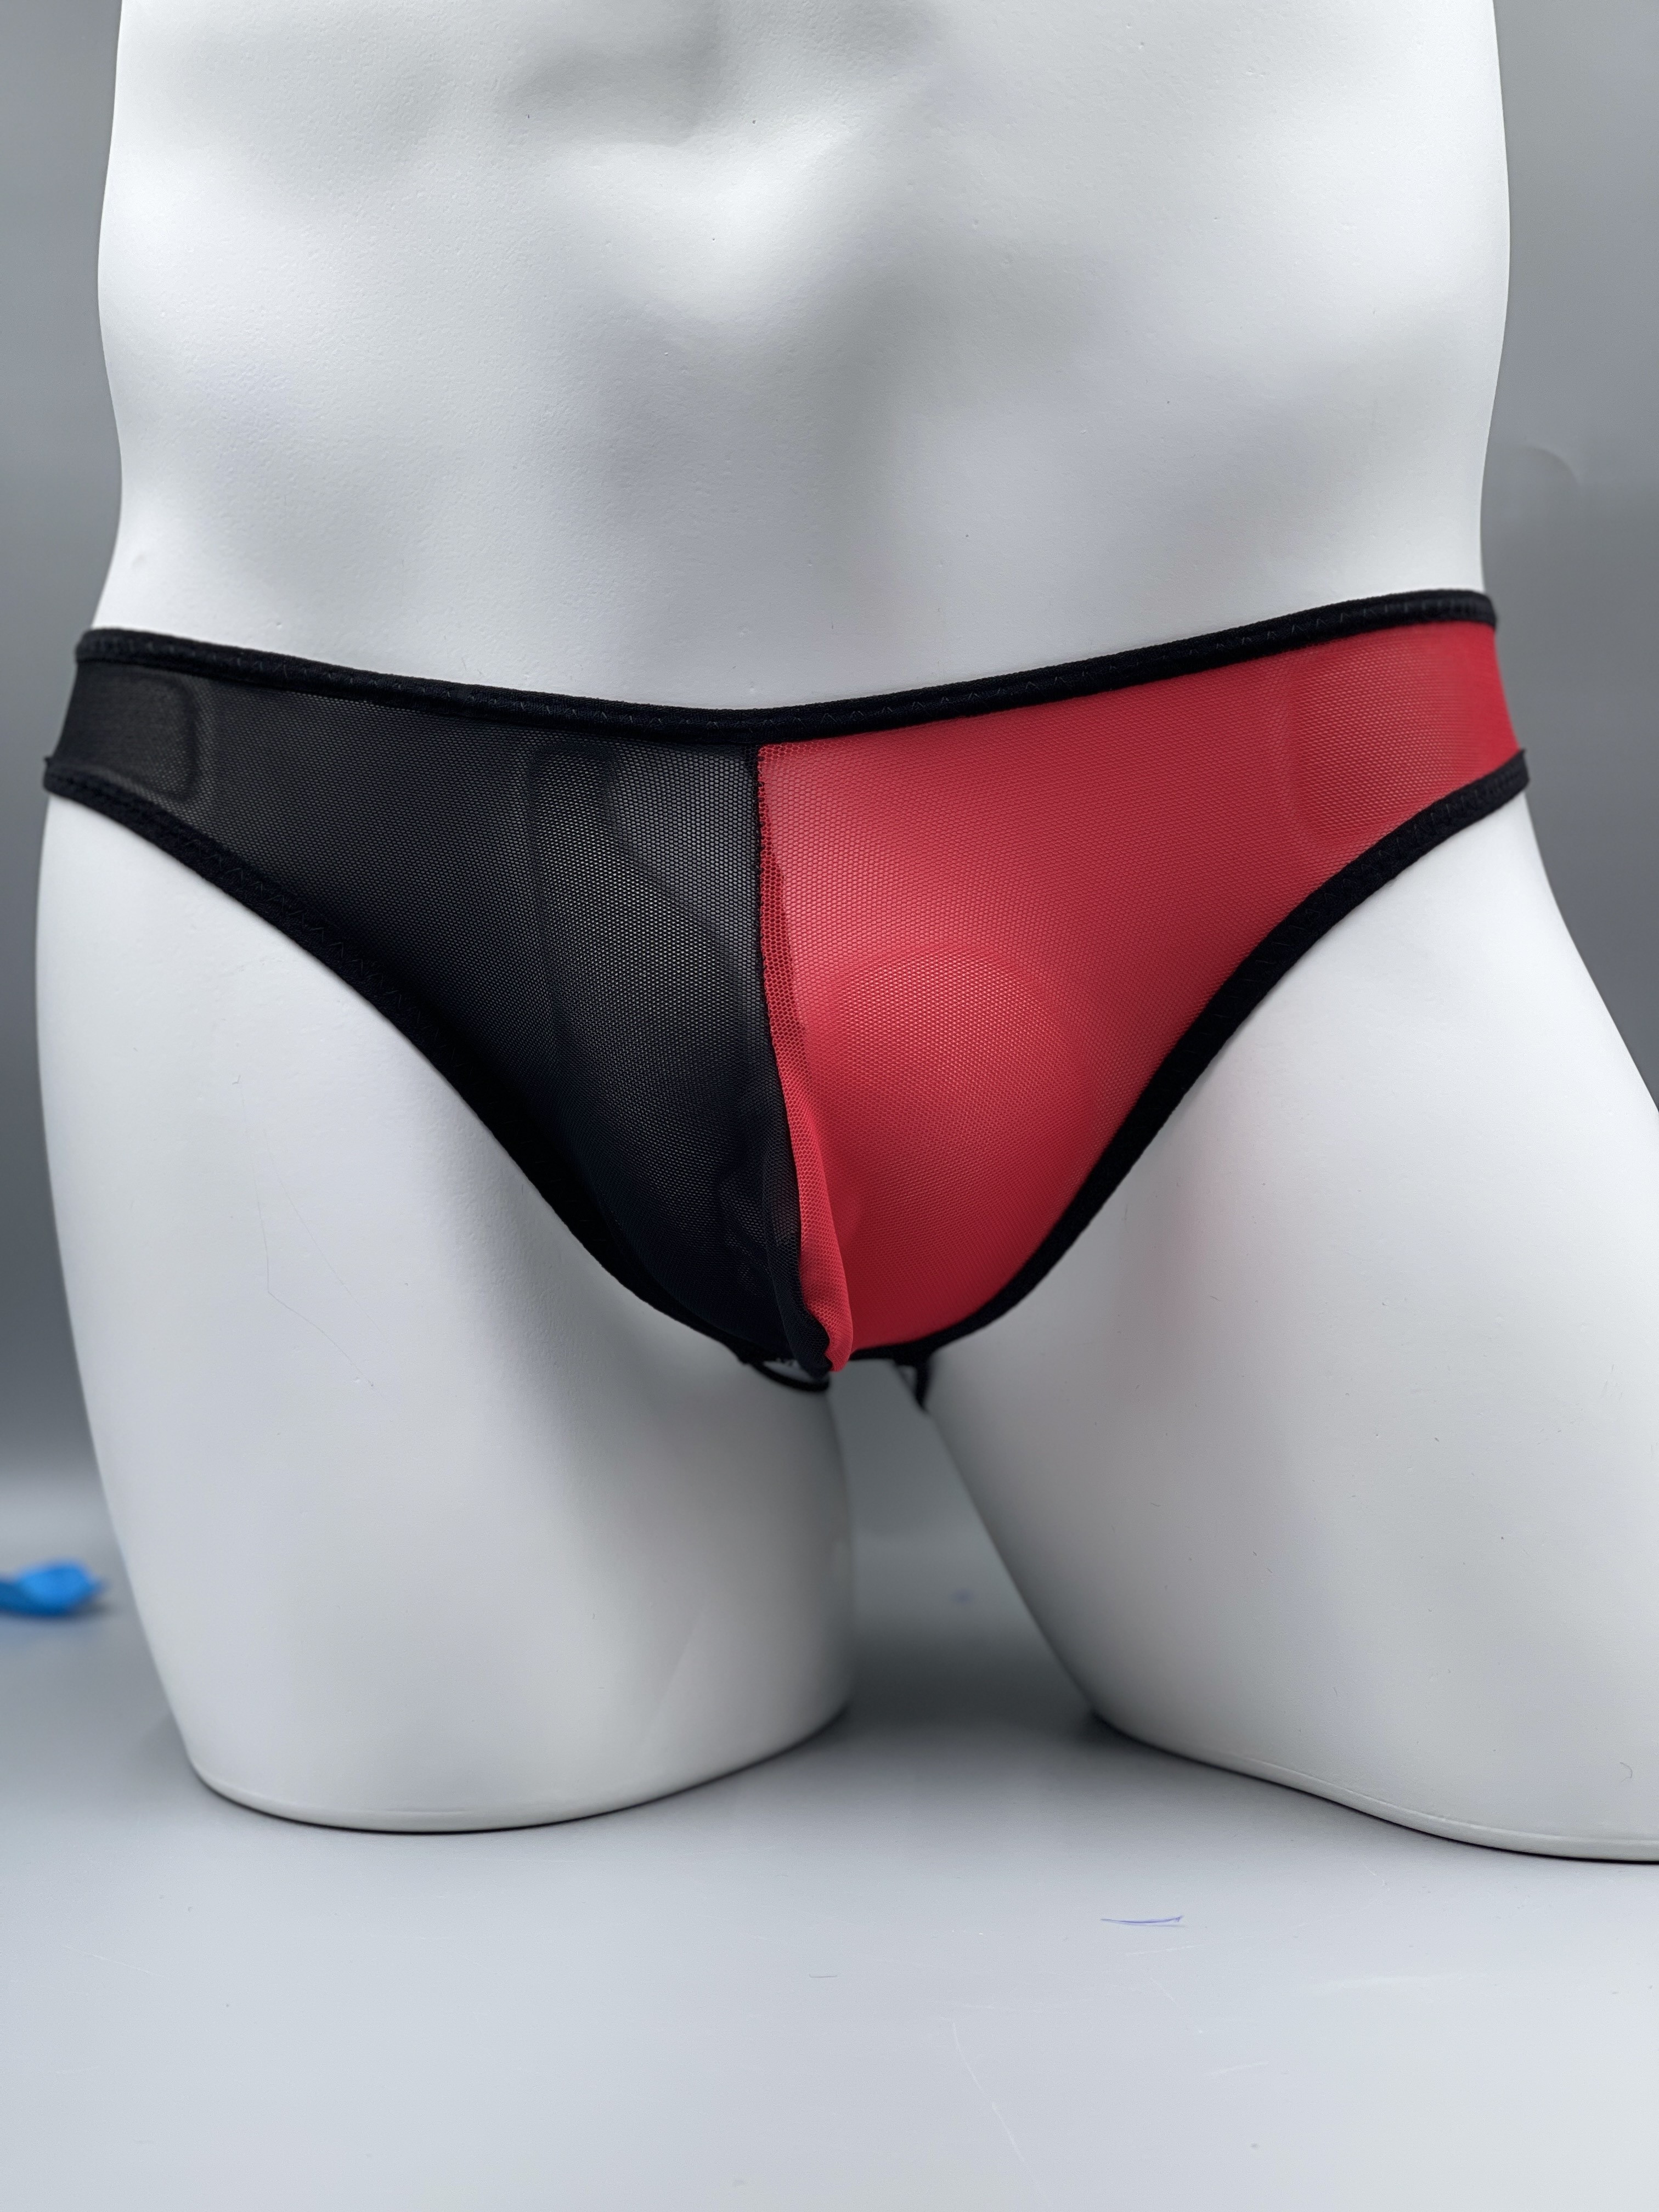 Men's Sexy Thong, Mens T-back Thongs Sexy Low Rise Briefs, Men